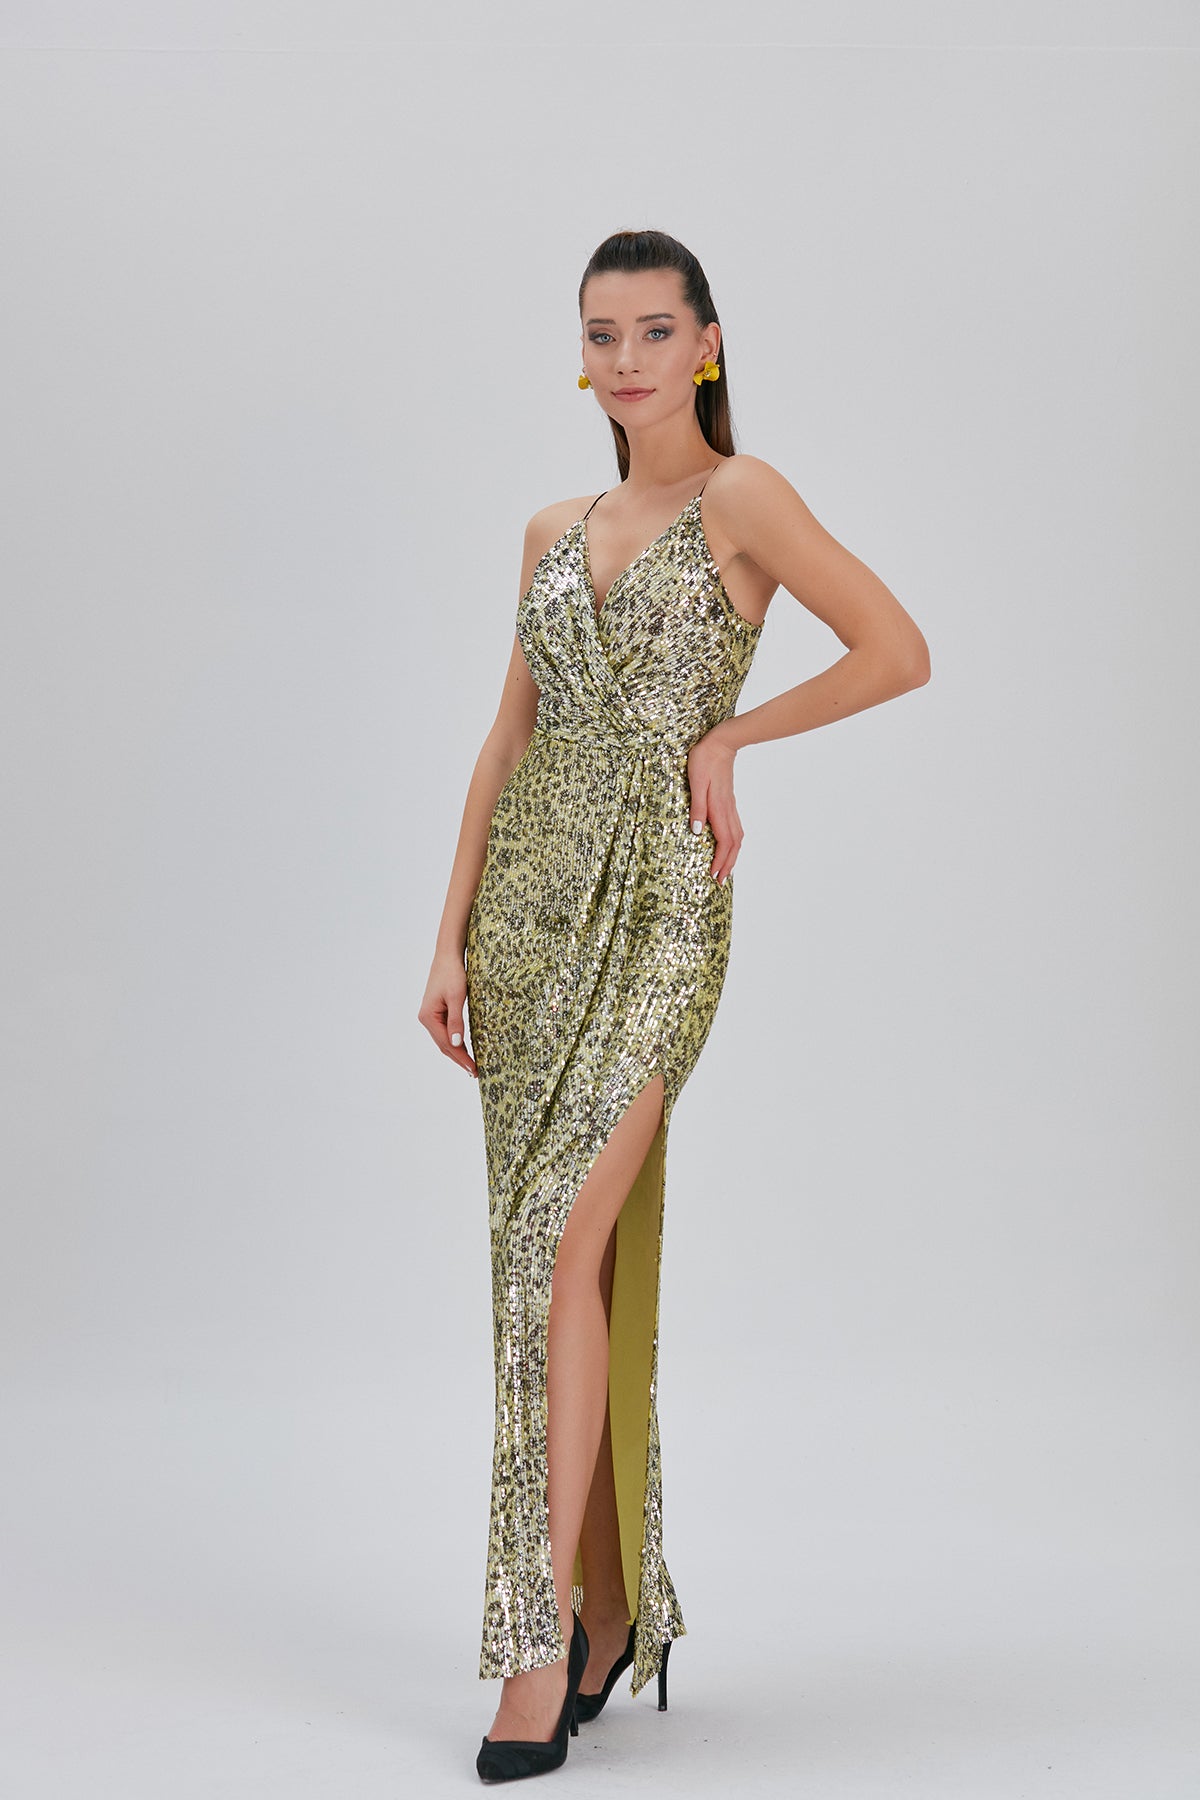 Alejia - Mystic Evenings | Evening and Prom Dresses